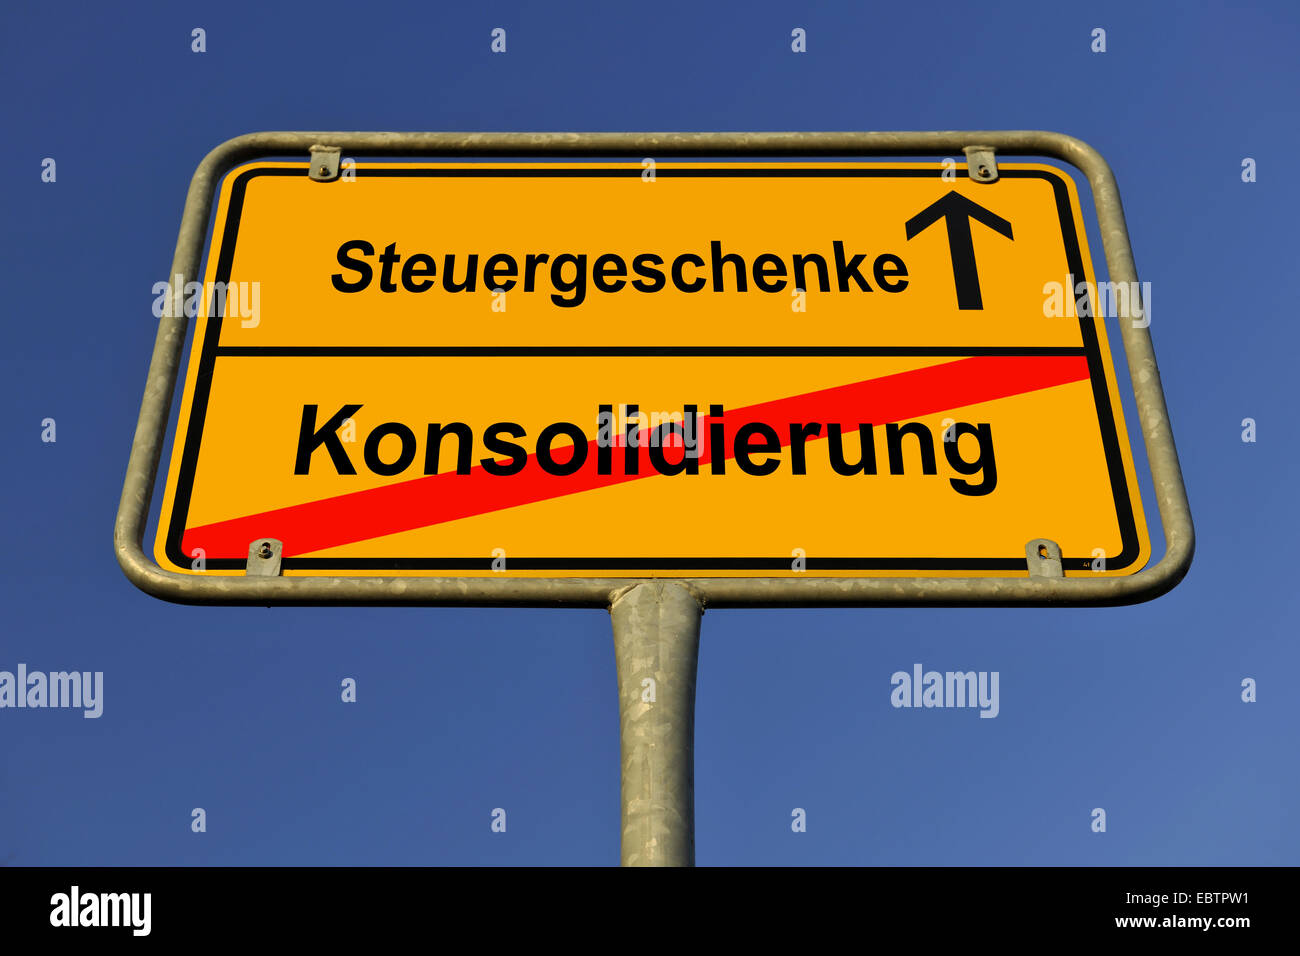 place name sign, symbol for conflict between tax goodies and funding Stock Photo